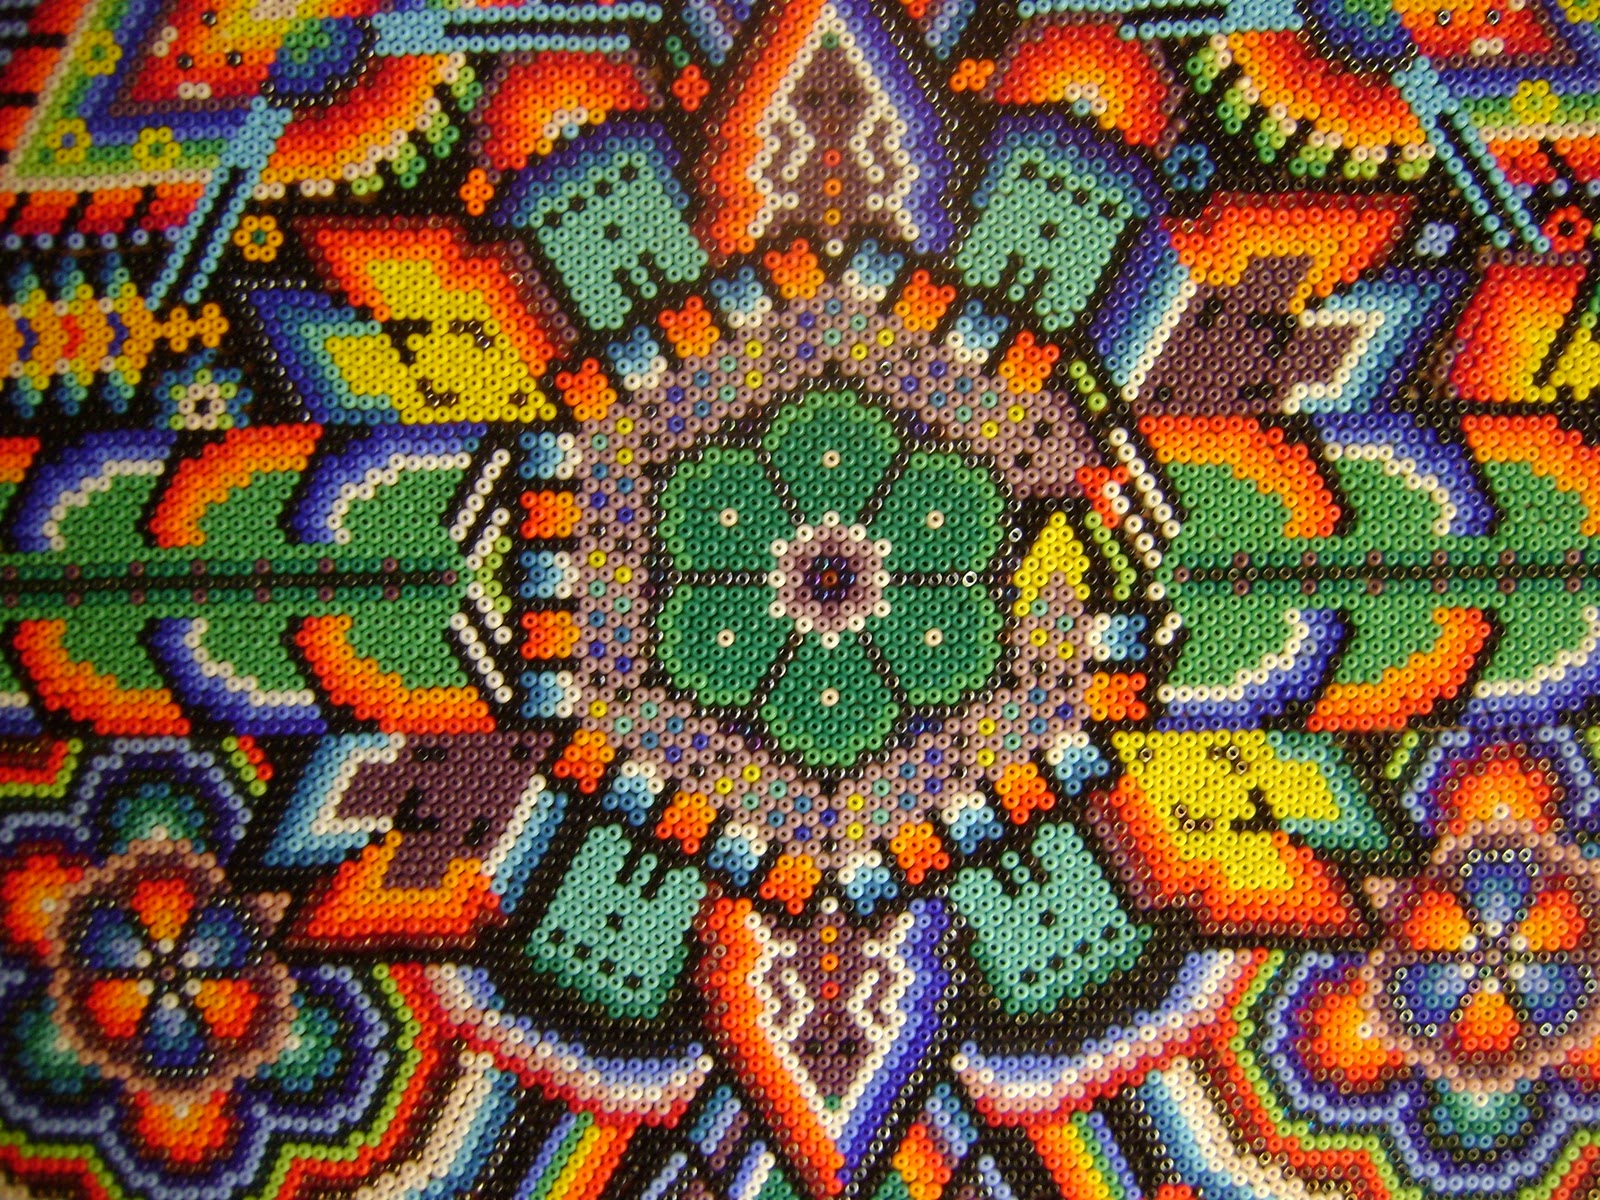 The Peyote-Inspired Art of the Huichol People